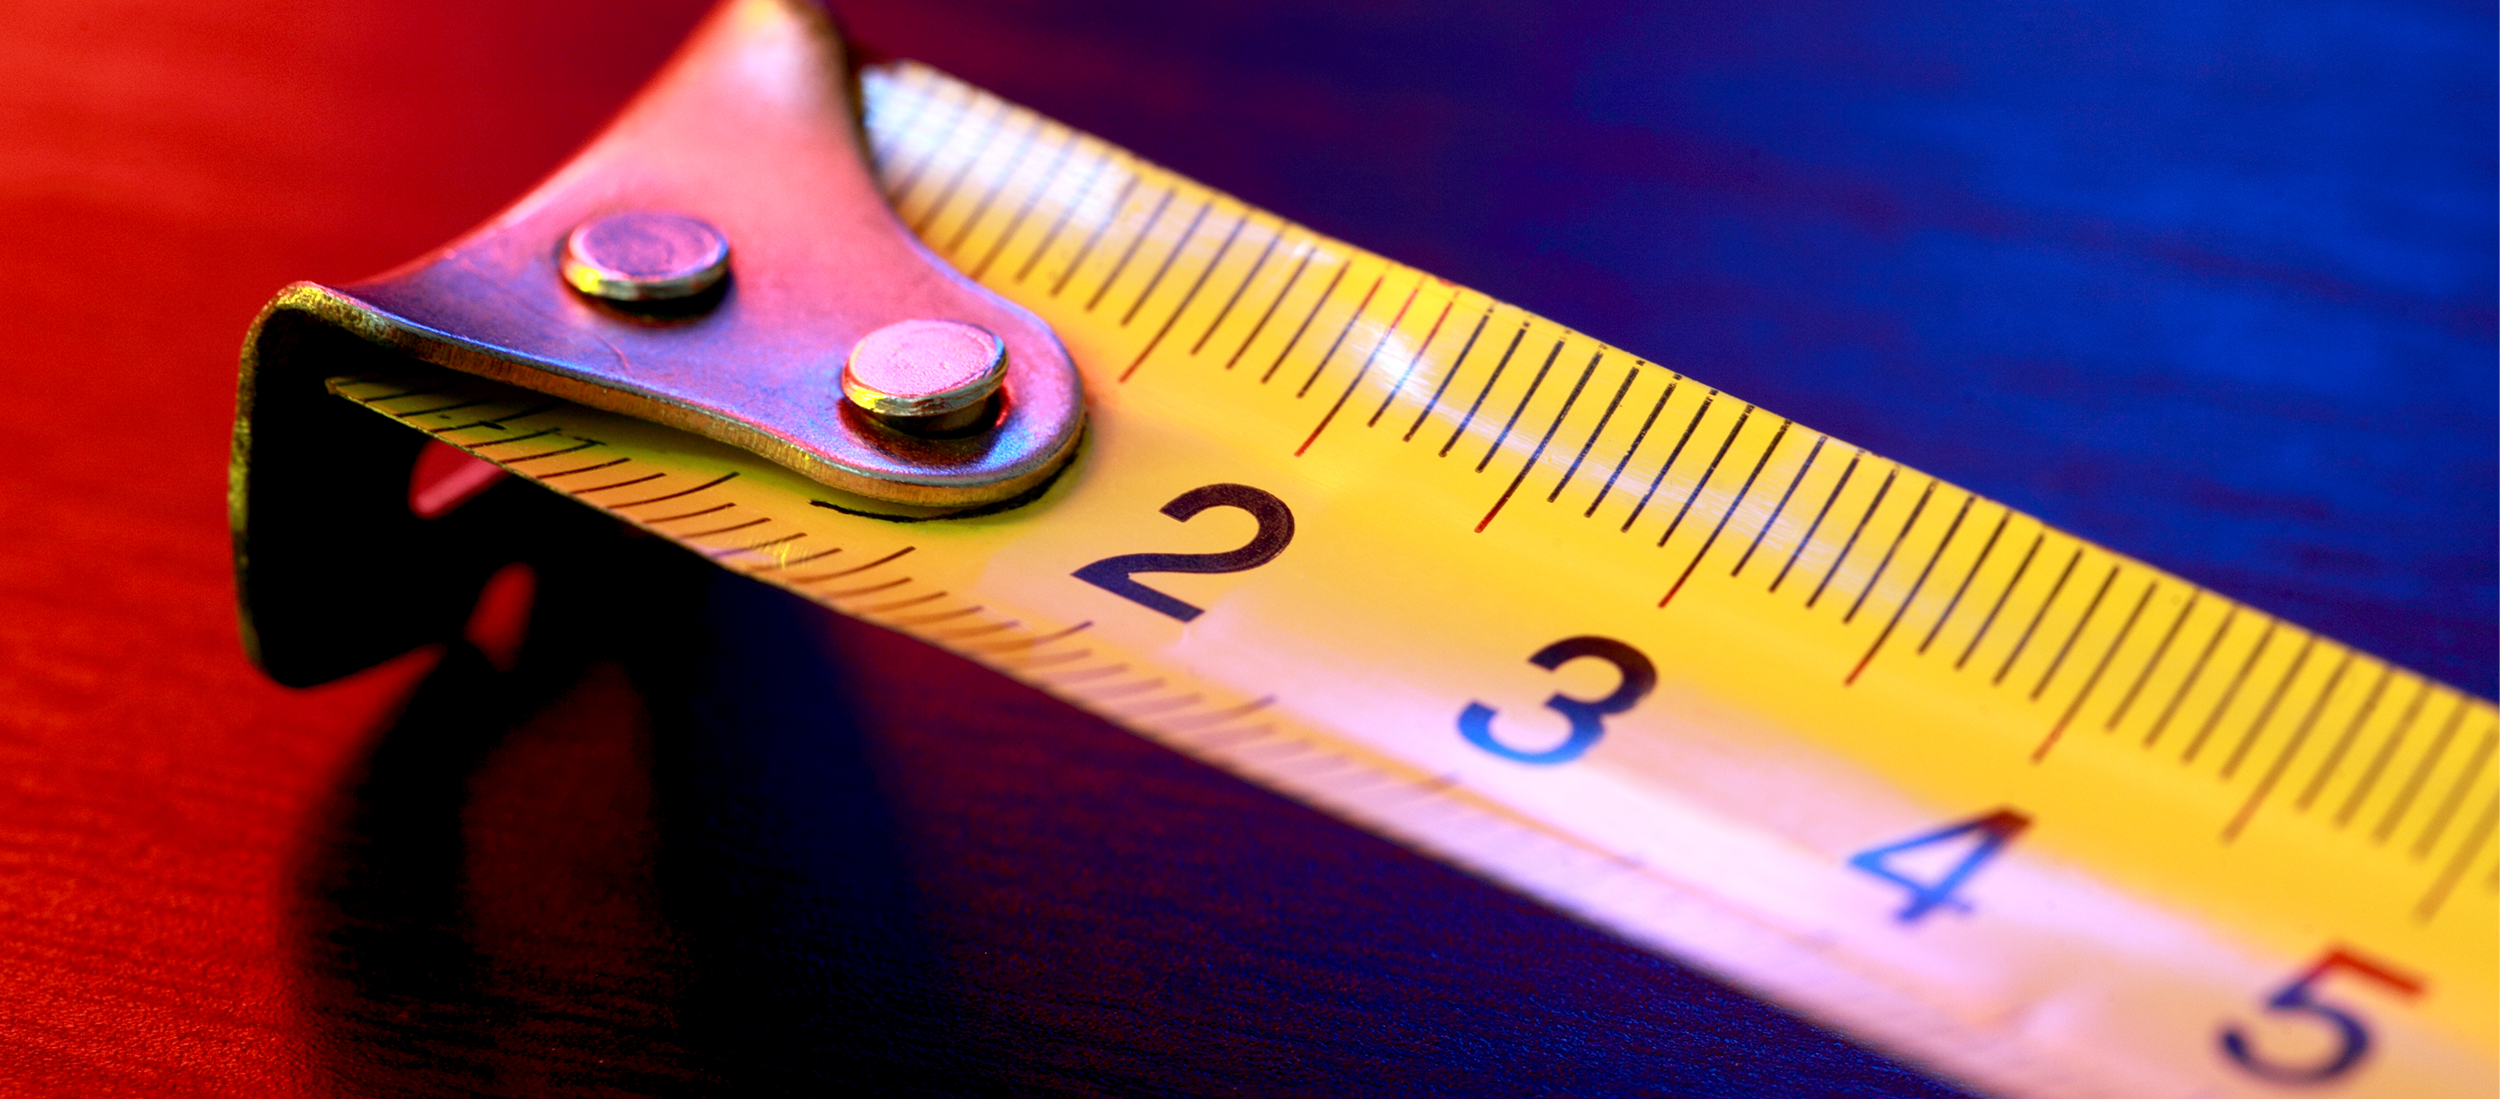 The 5 Ways Clients Measure Law Firm Performance Now